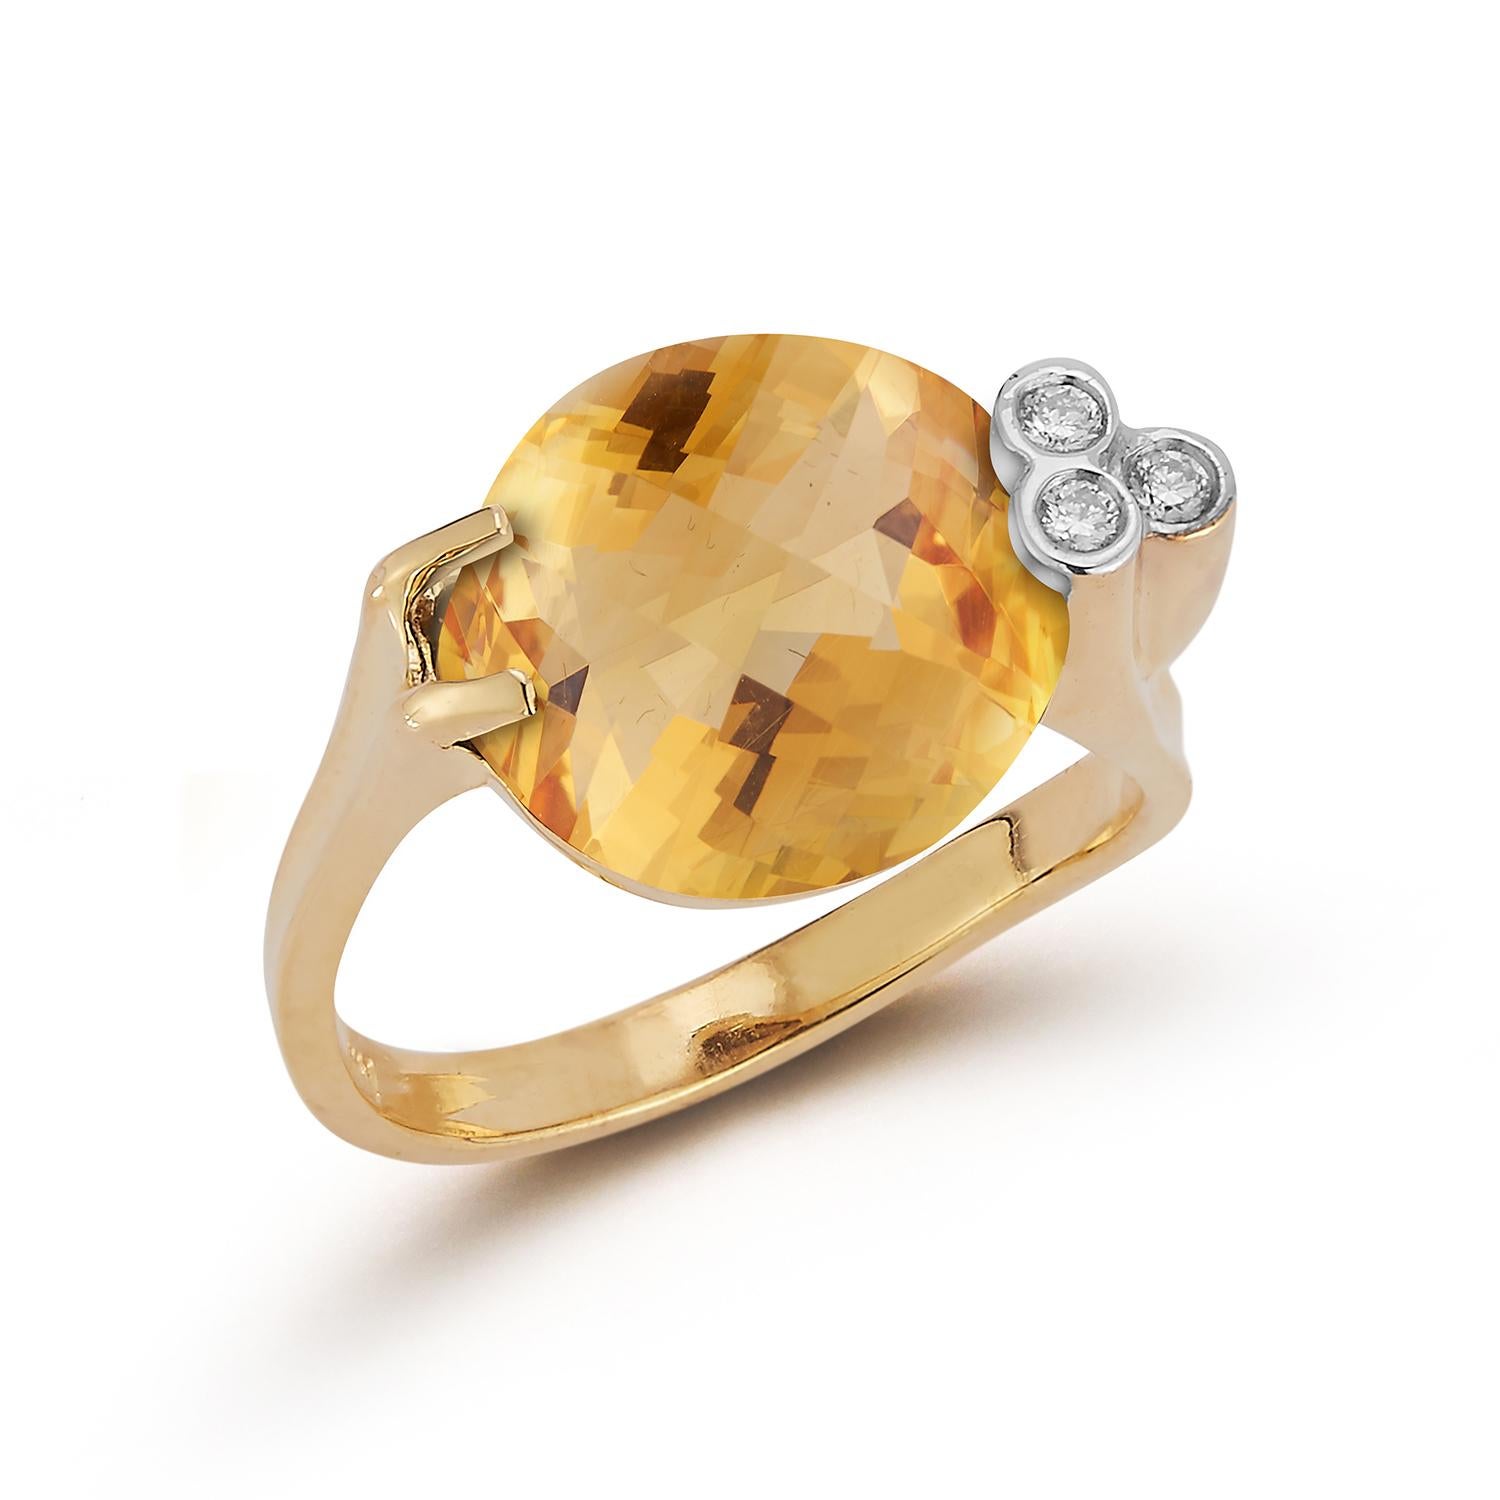 For Sale:  Hand-Crafted 14 Karat Yellow Gold Citrine Color Stone Cocktail Ring 4